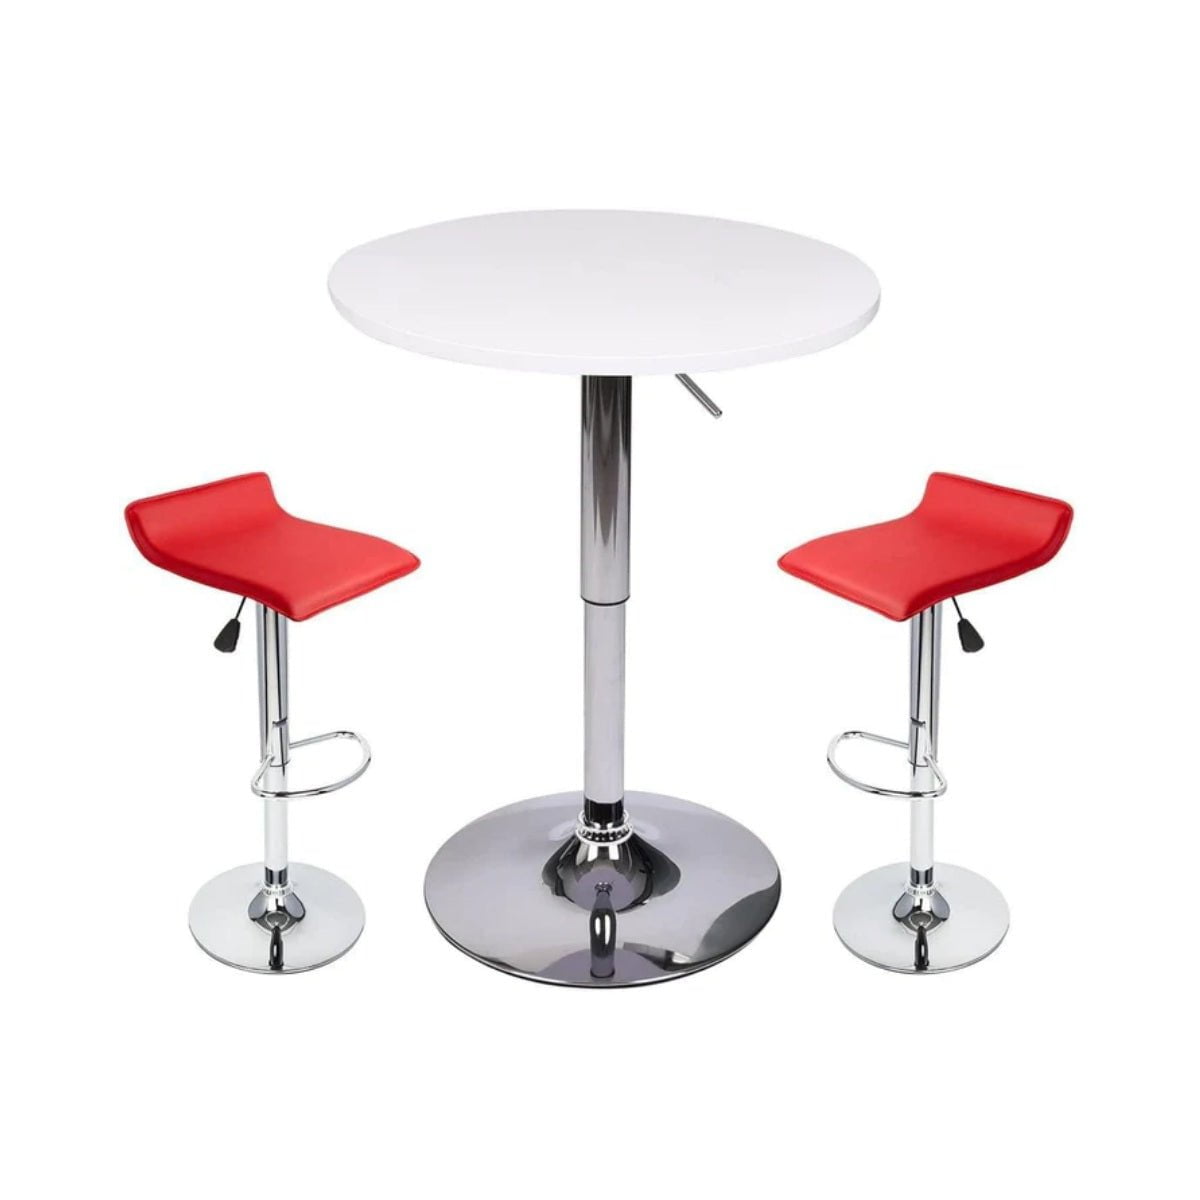 Elecwish Bar Table White / Red Bar Table Set 3-Piece OW0302